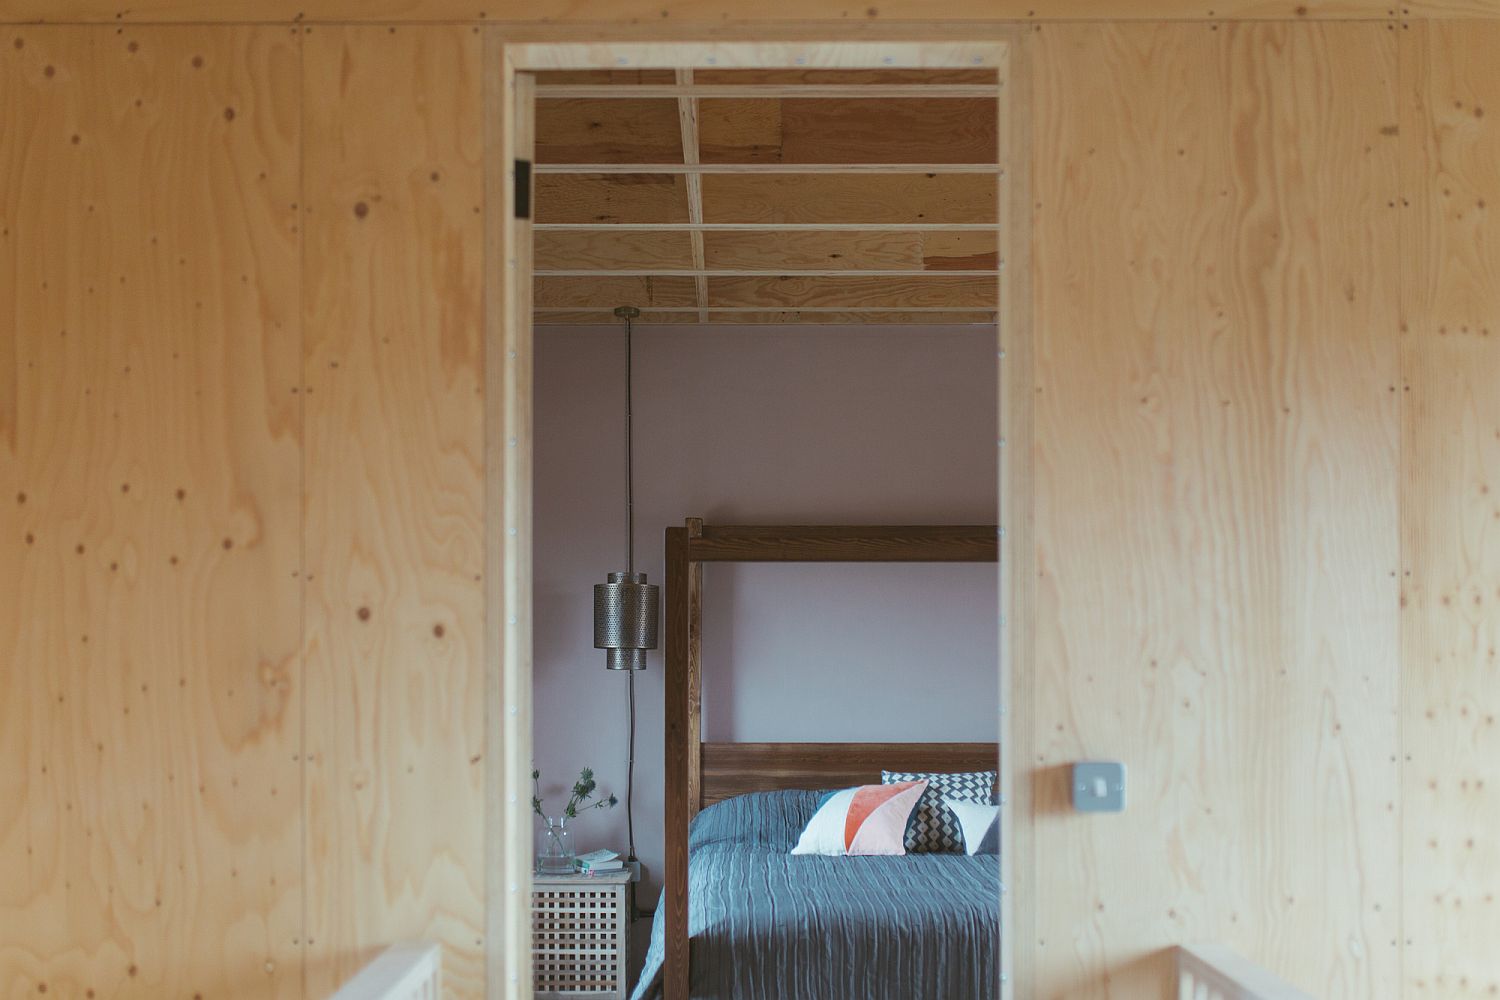 View-of-the-bedroom-from-outside-with-walls-in-wood